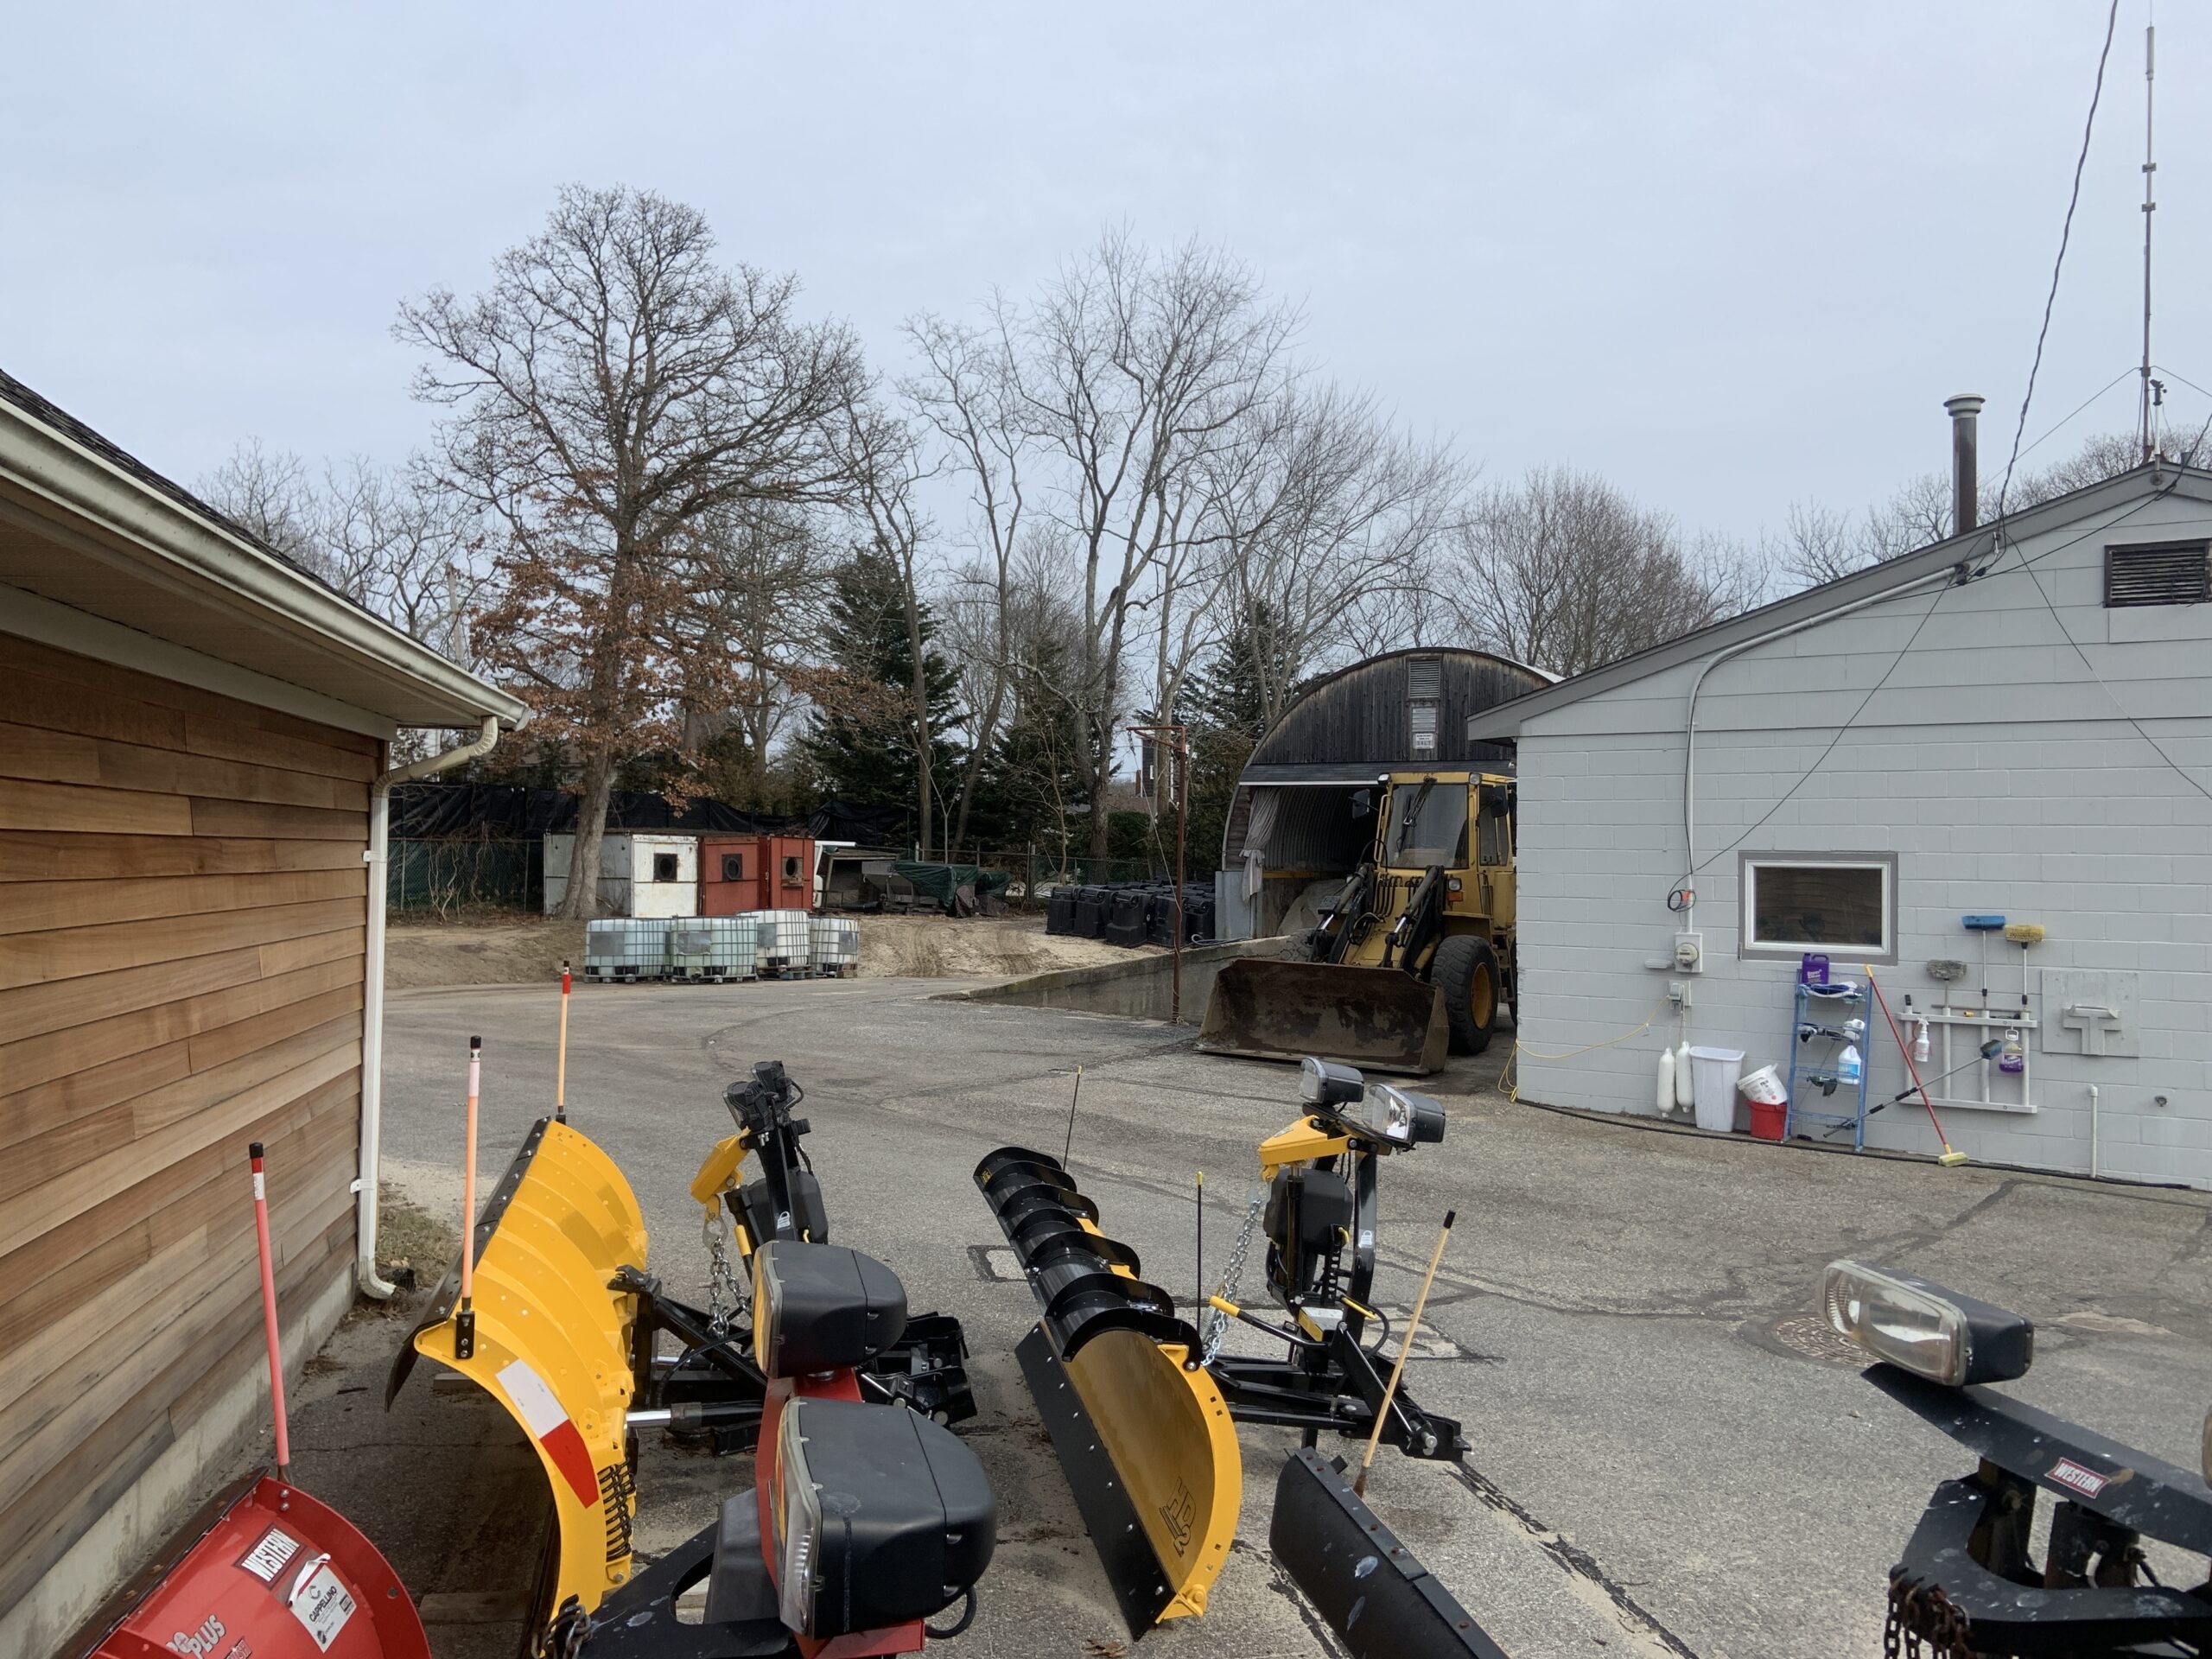 Additional affordable apartments could be constructed on the site of the Sag Harbor Village Department of Public Works garage on Columbia Street. STEPHEN J. KOTZ